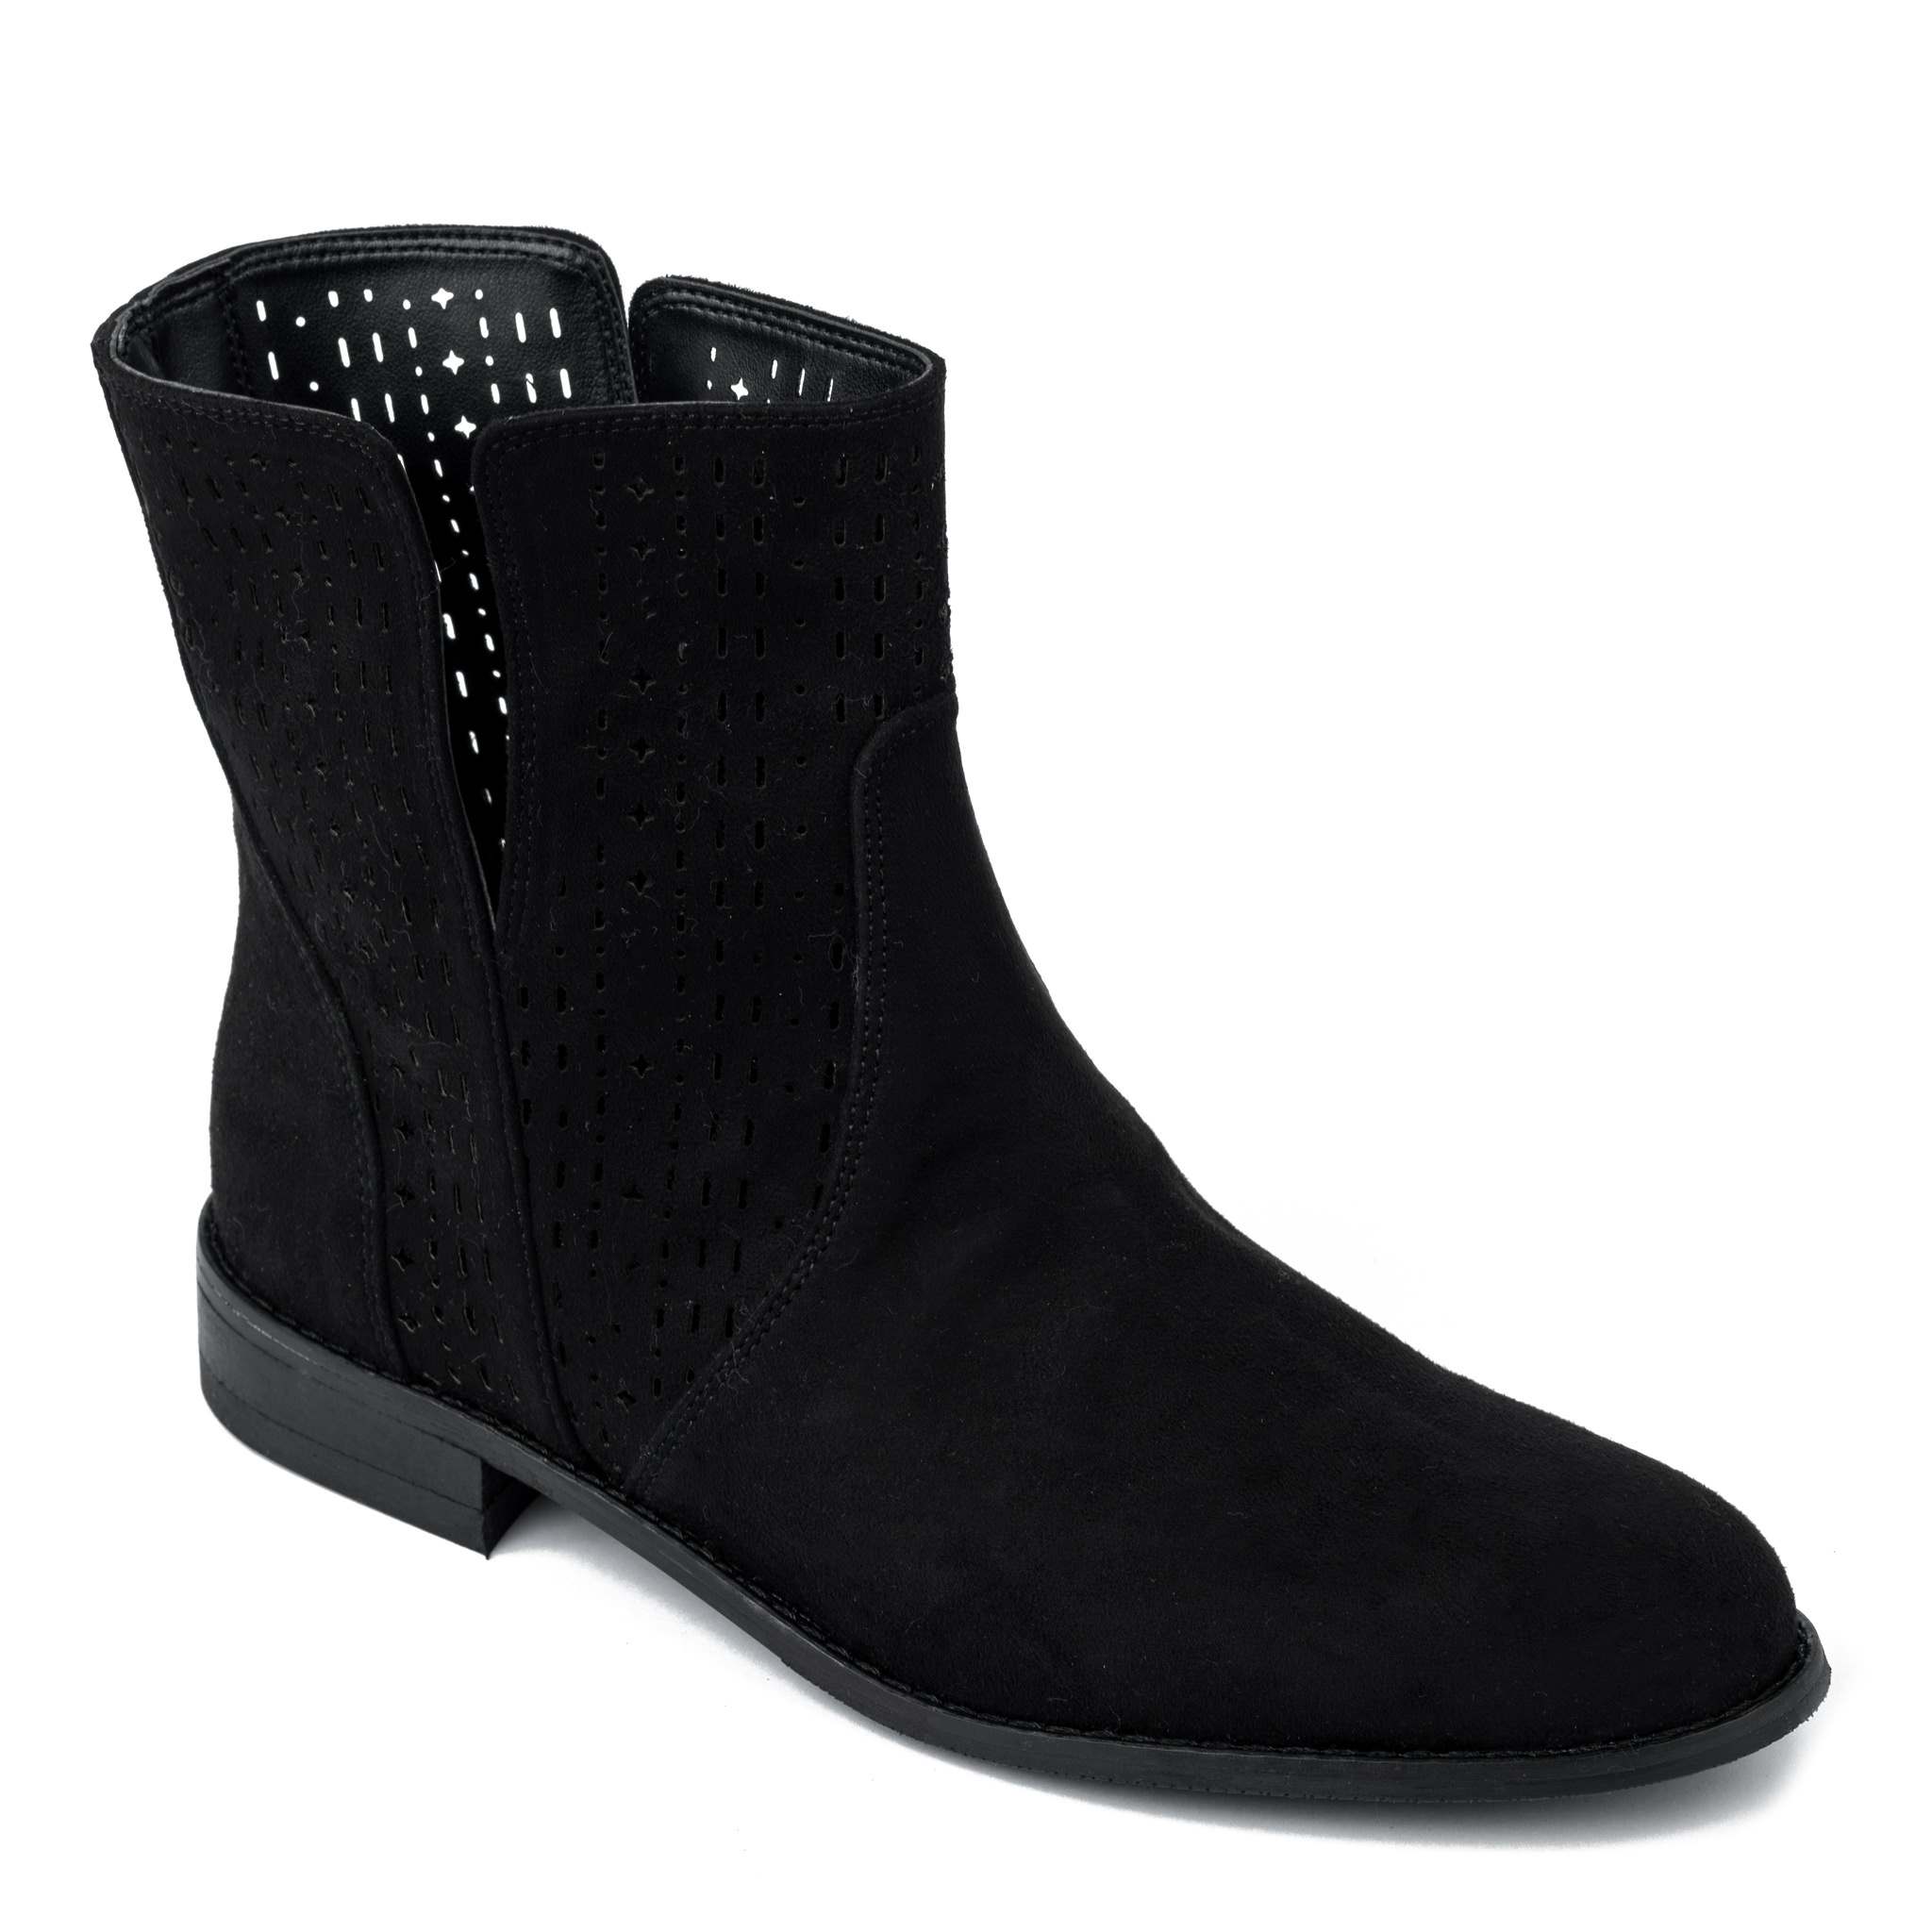 HOLLOW ANKLE BOOTS - BLACK